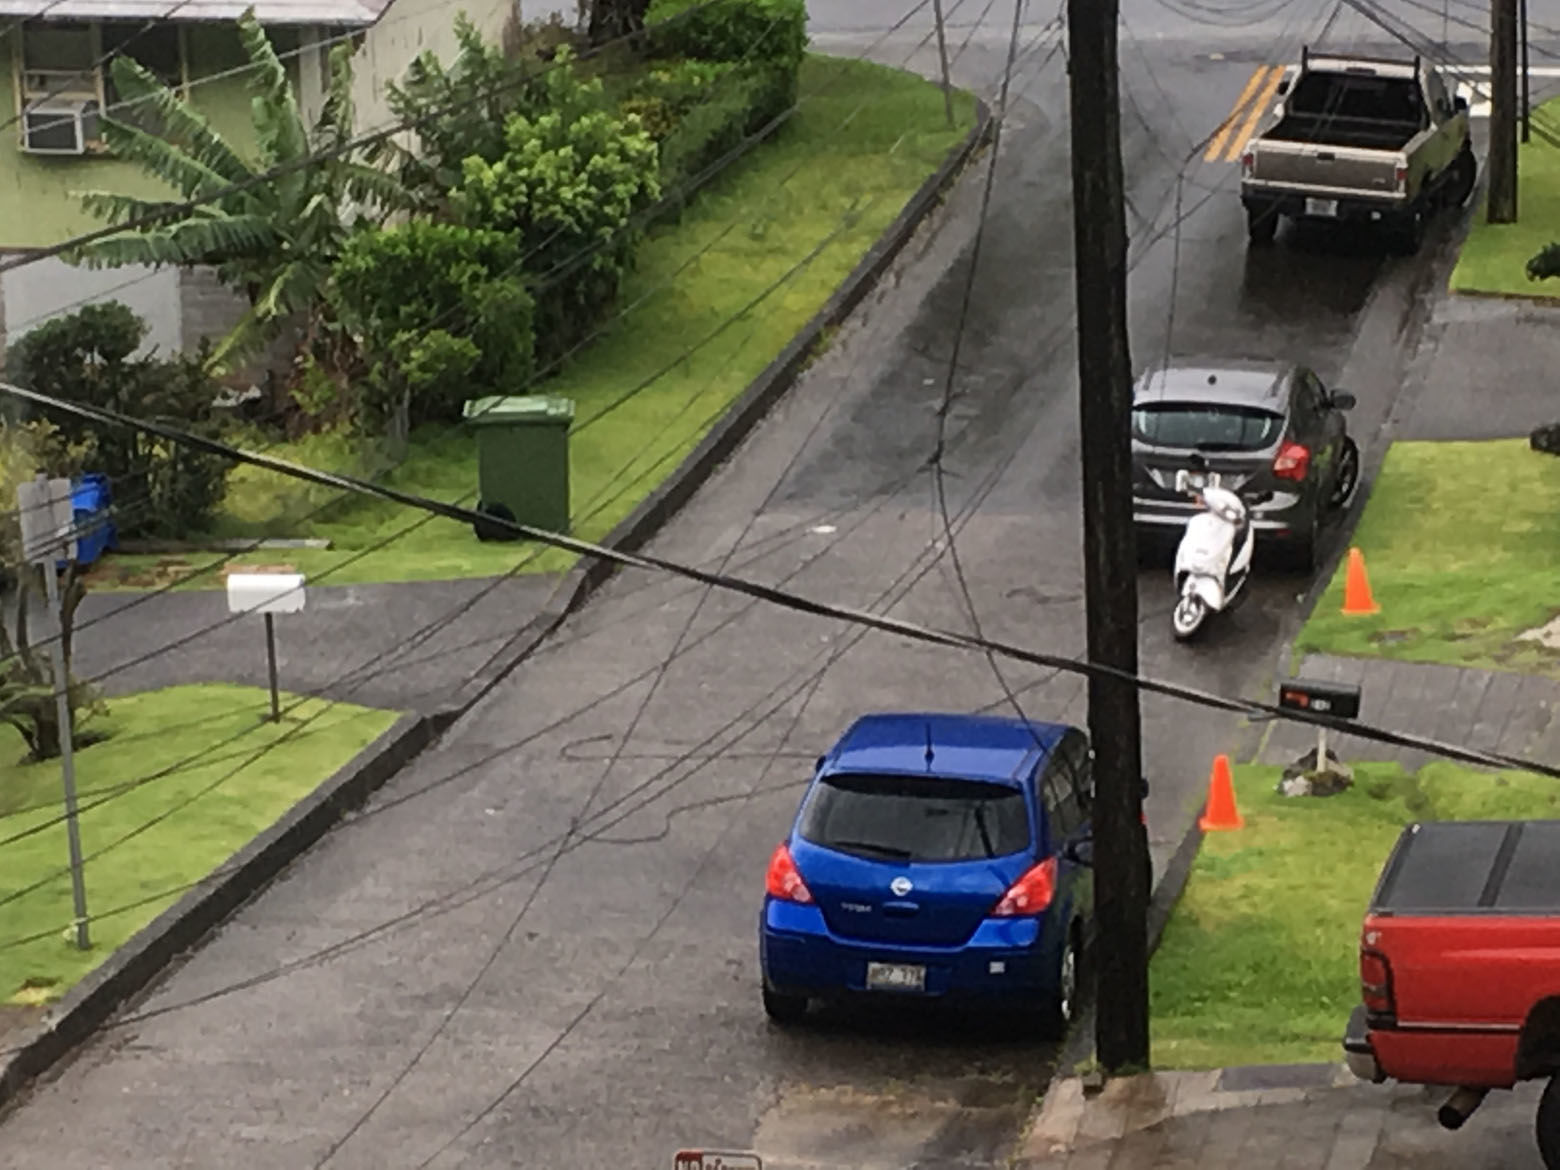 A utility line lays in the street in the Nuuanu neighborhood of Honolulu, Friday, Aug. 24, 2018, as Hurricane Lane approaches. Hurricane Lane barreled toward Hawaii on Friday, dumping torrential rains that caused flooding on the Big Island as people stocked up on supplies and piled sandbags to shield oceanfront businesses against the increasingly violent surf. (AP Photo/Caleb Jones)